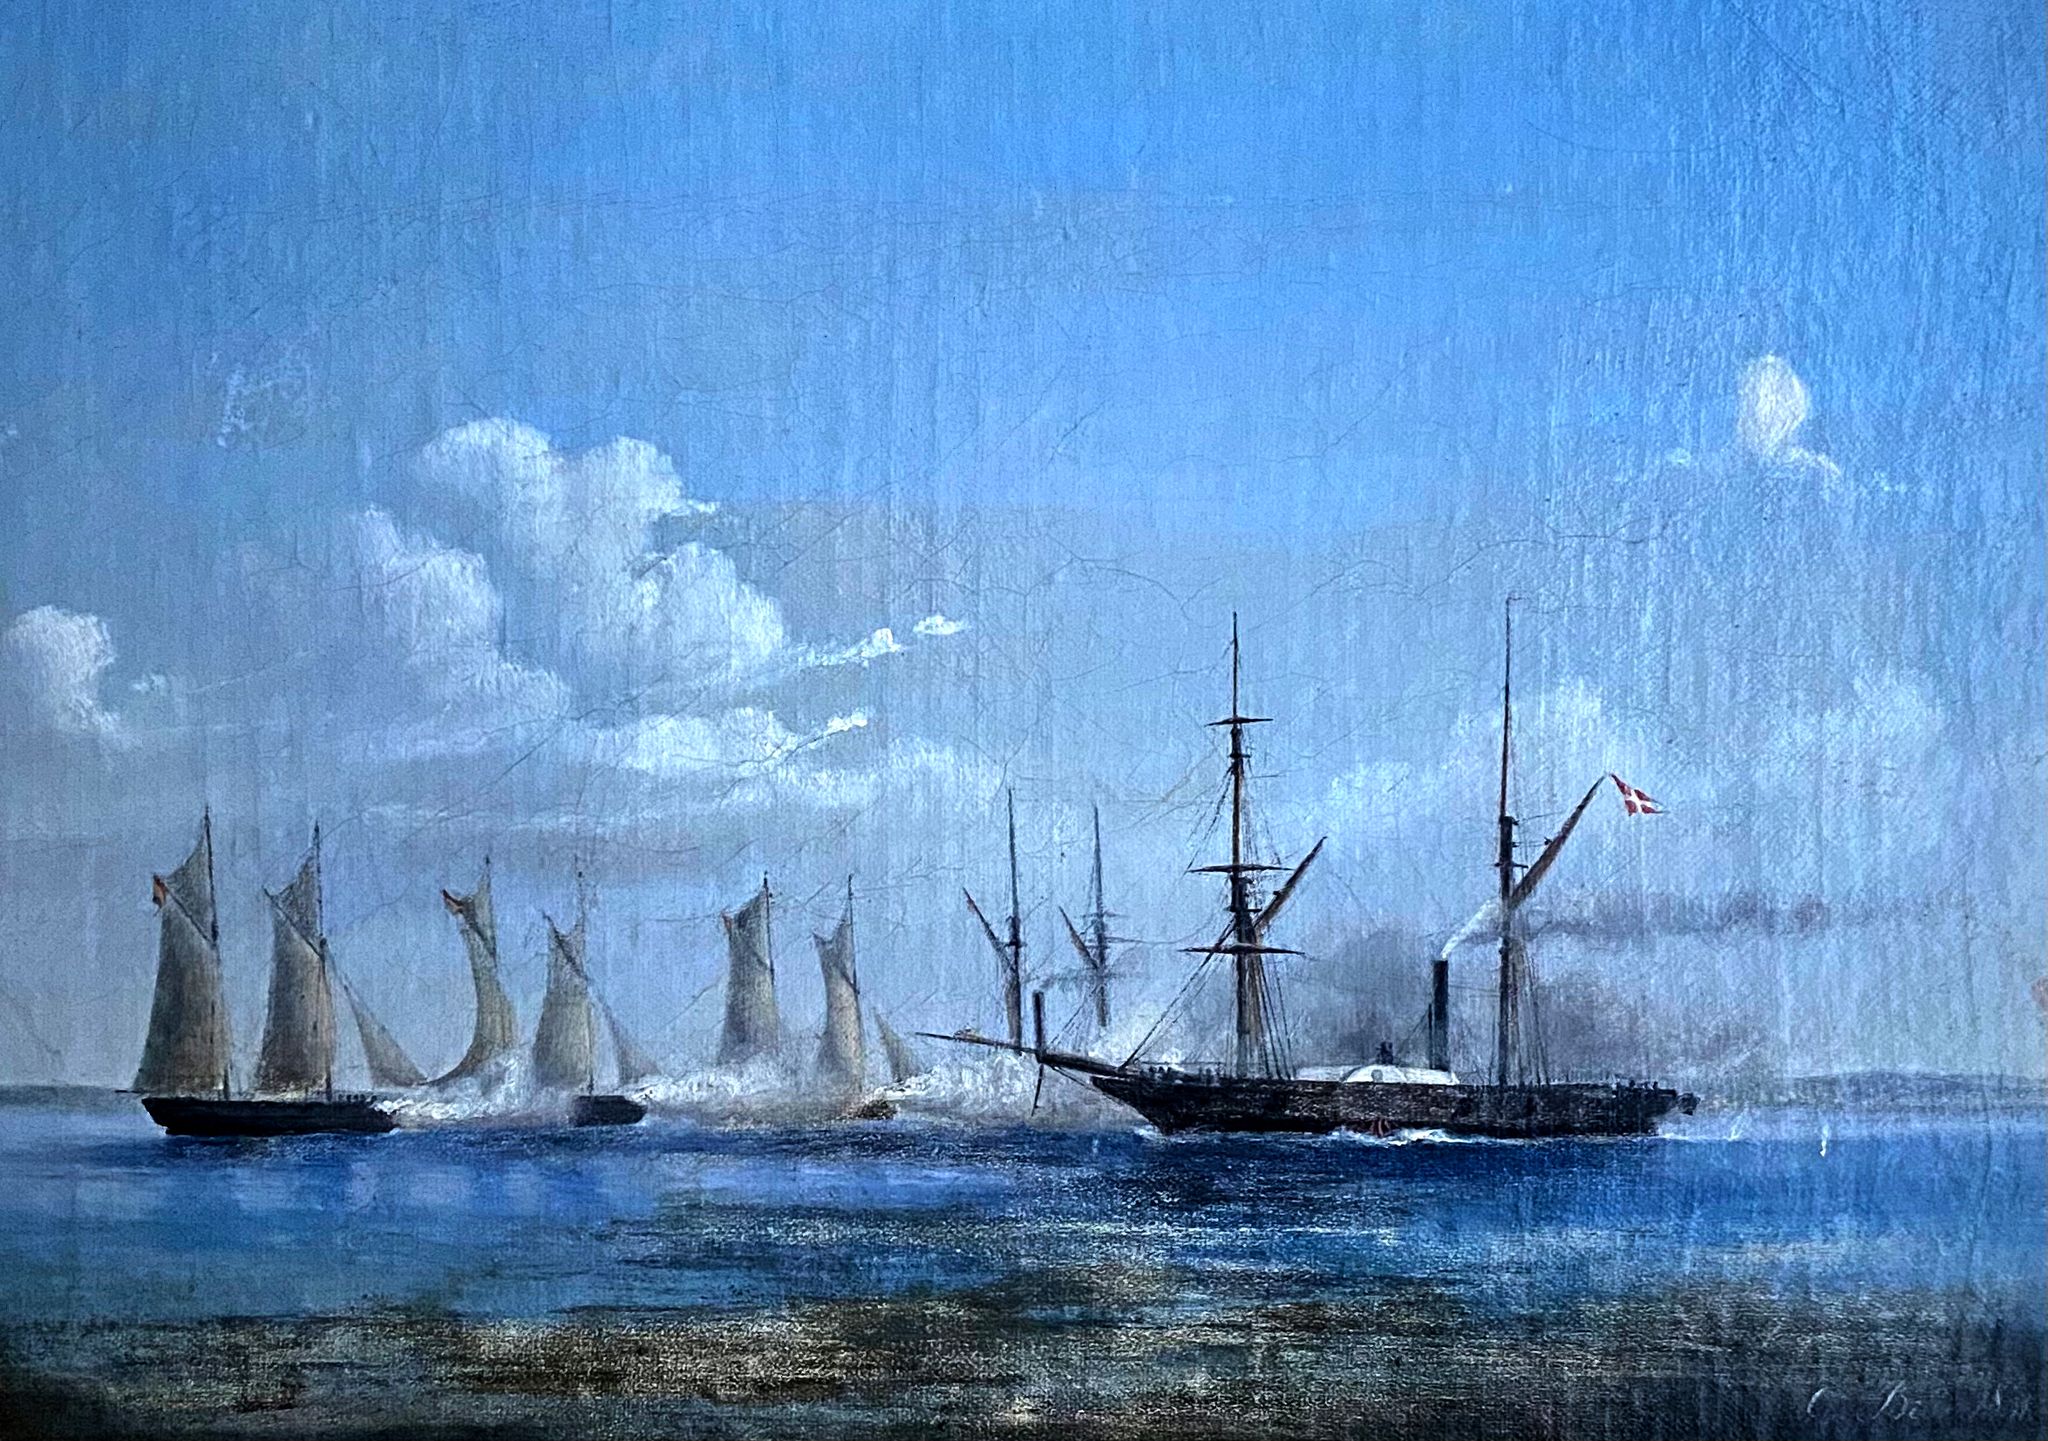 The warship Hekla in battle with German gunboats, 16 August 1850